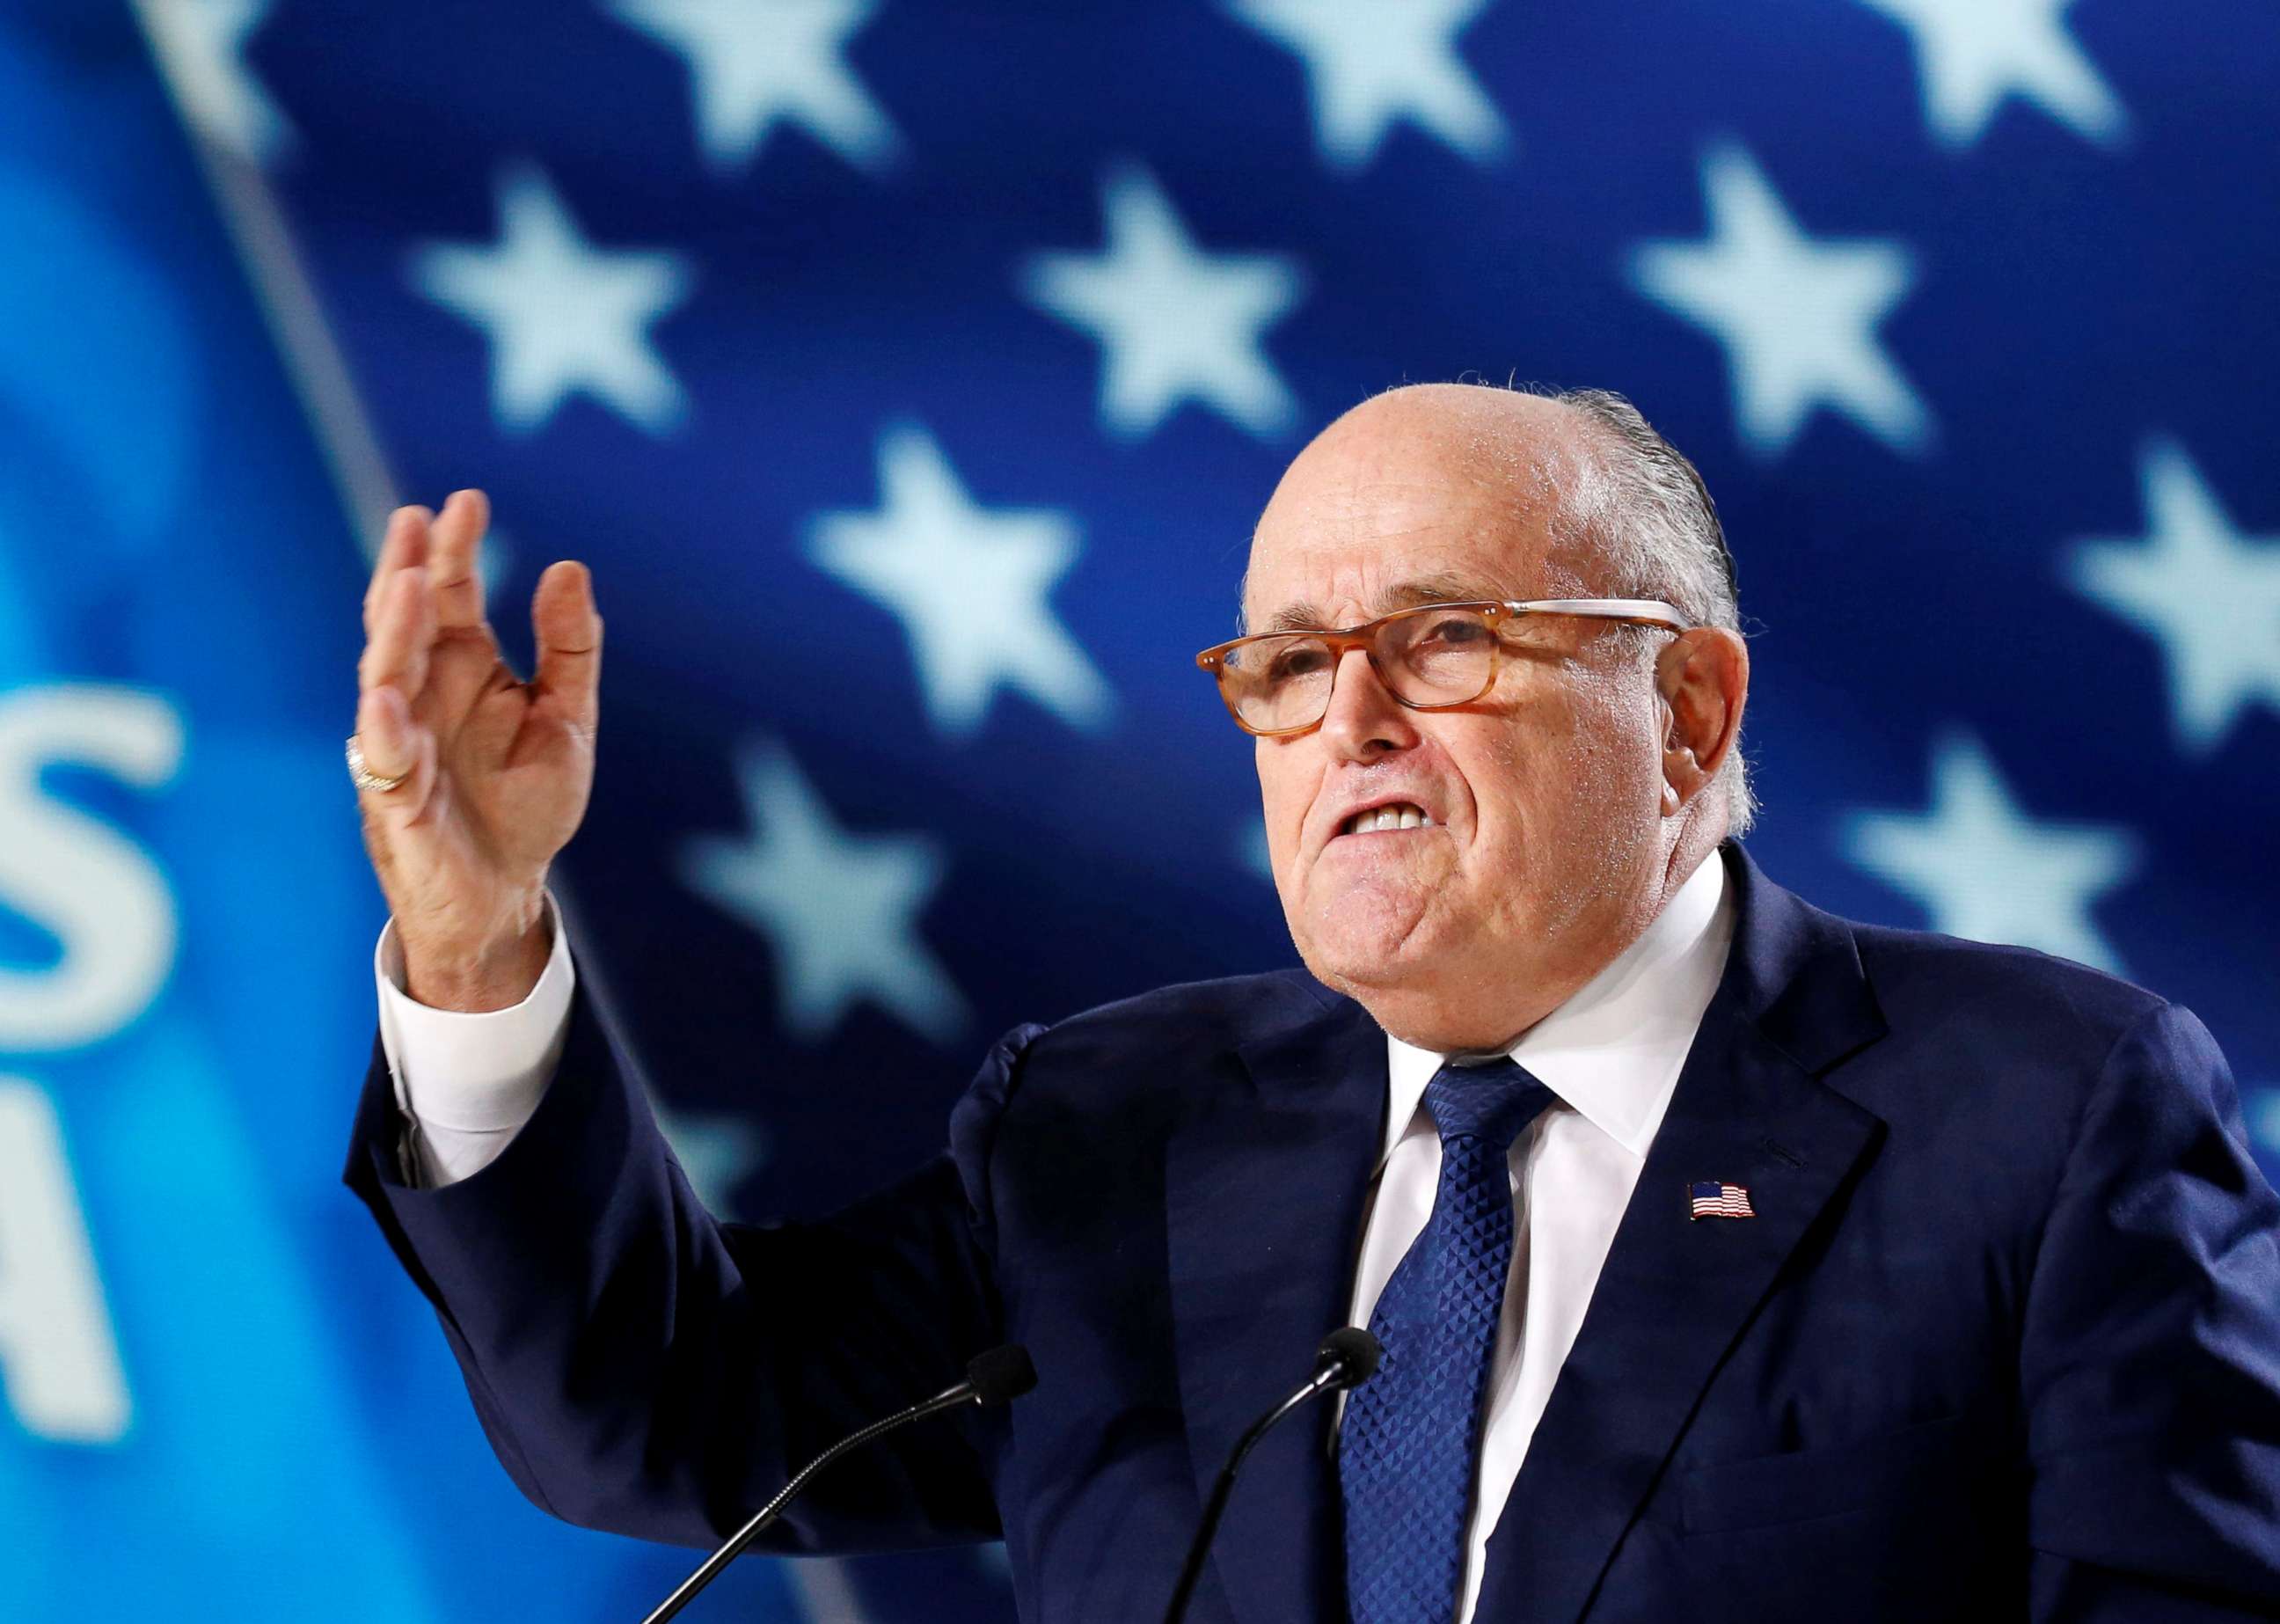 PHOTO: Rudy Giuliani, former Mayor of New York City, delivers a speech as he attends the National Council of Resistance of Iran, meeting in Villepinte, near Paris, France, June 30, 2018.